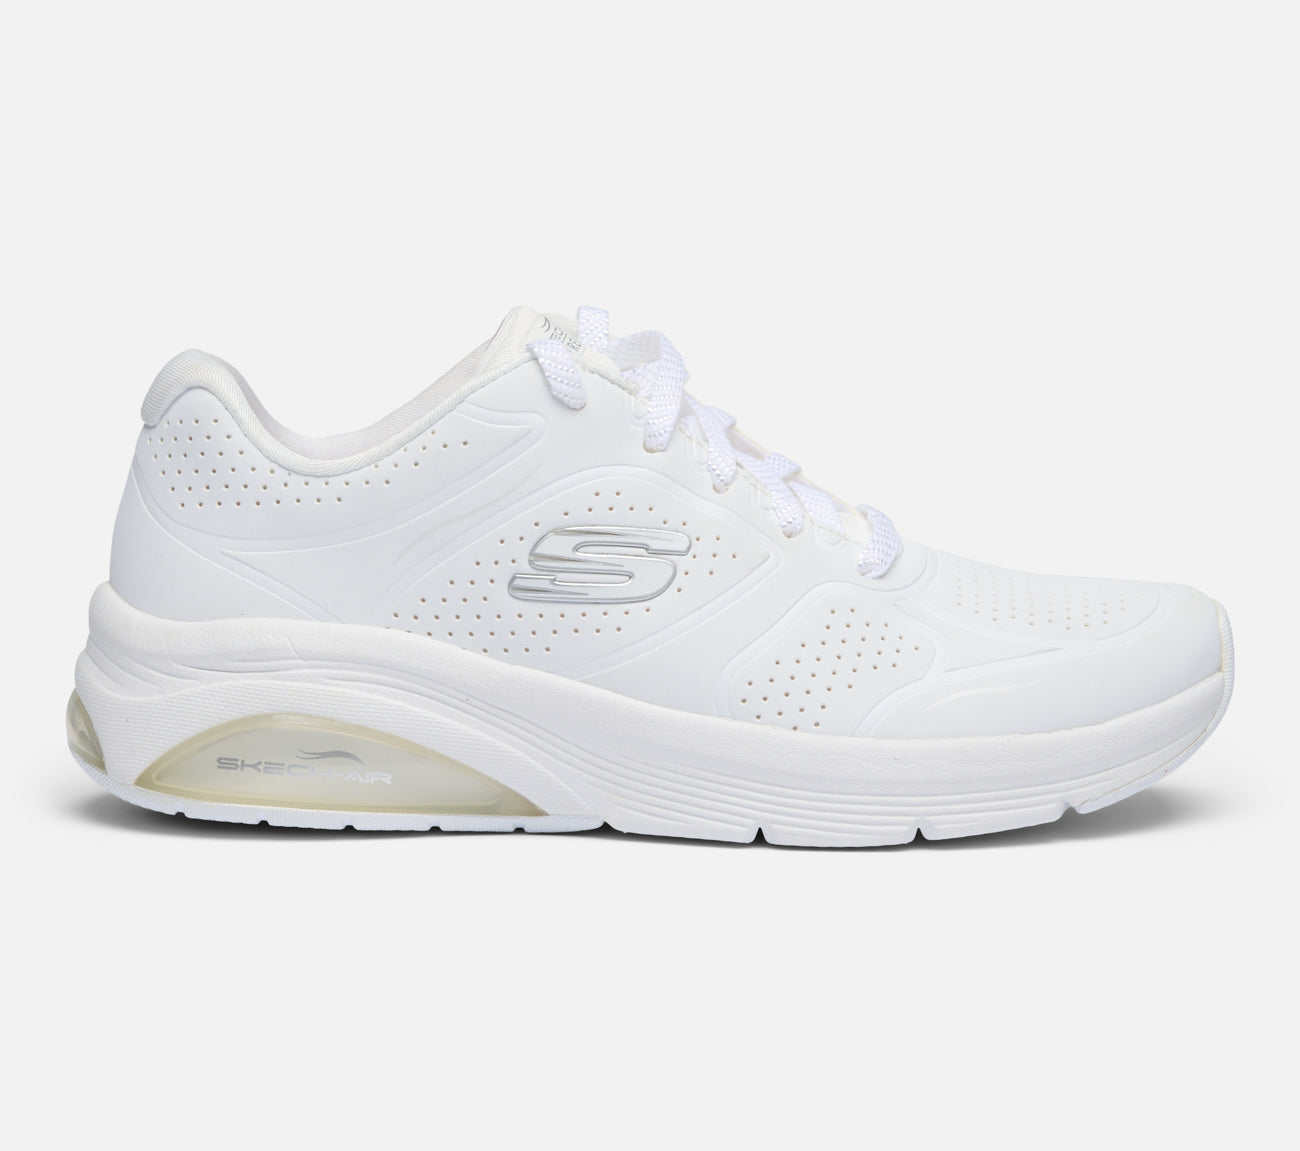 Skech-Air Extreme 2.0 - Classic Finesse Shoe Skechers